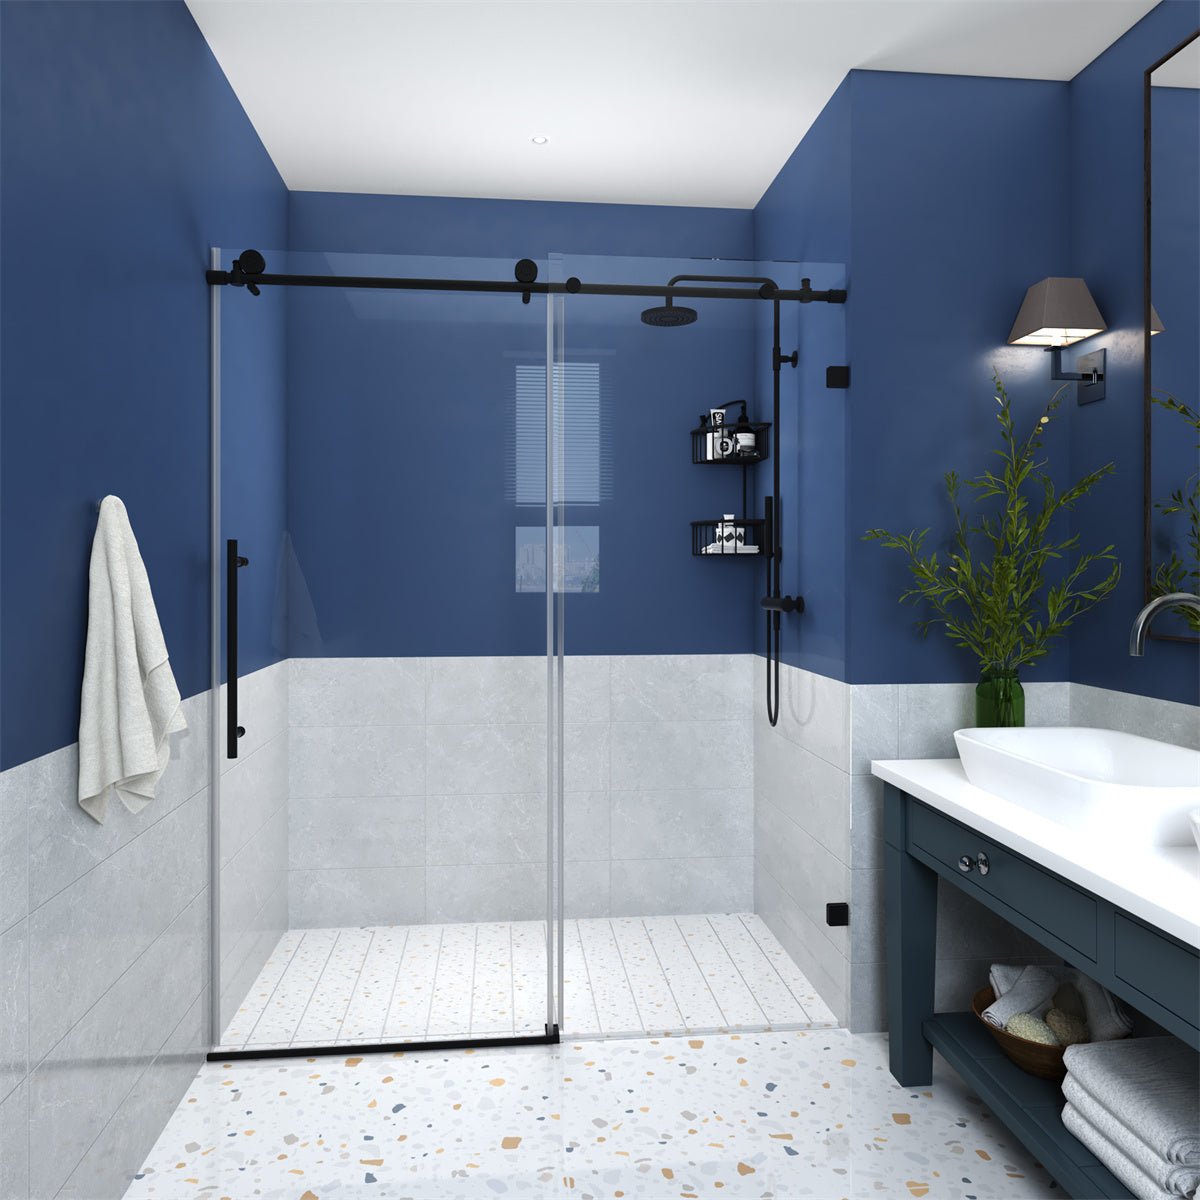 Anchor 56-60 in. W x 74 in. H Frameless Tall Shower Door Sliding Walk-in Shower Design with 8mm thick Clear Glass,Black